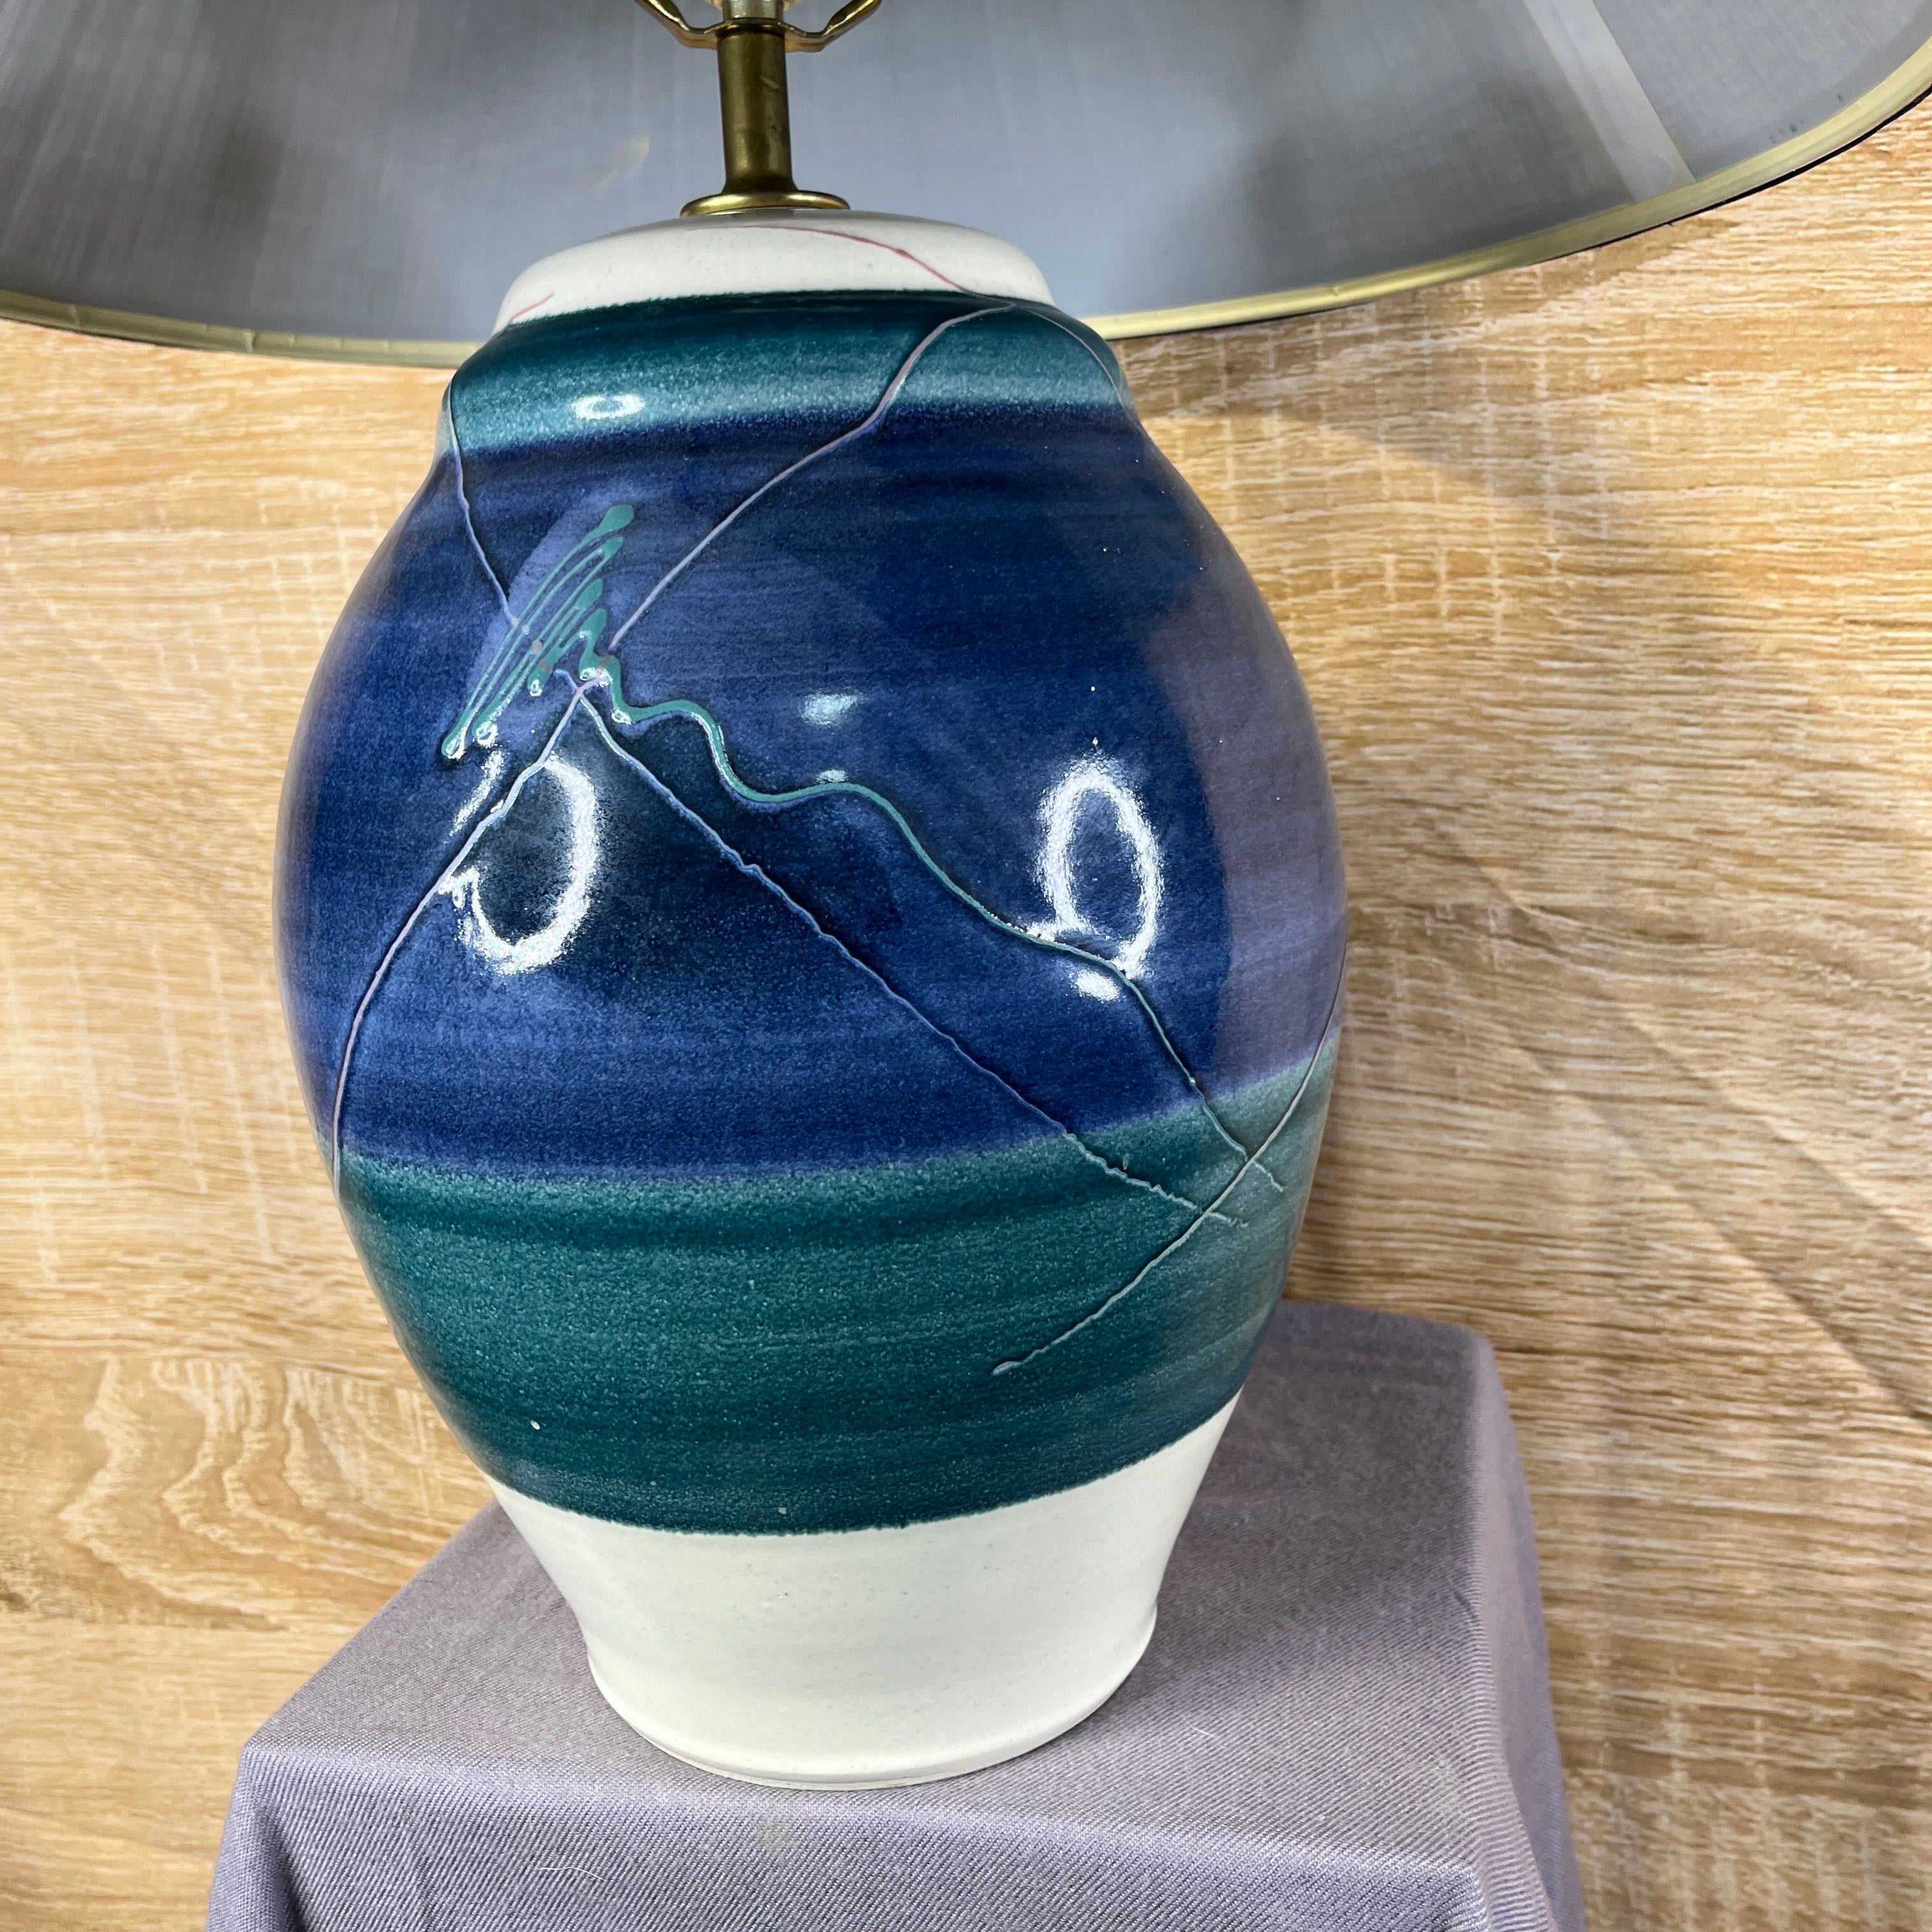 Blue & Green Ceramic Jar with Shade Table Lamp